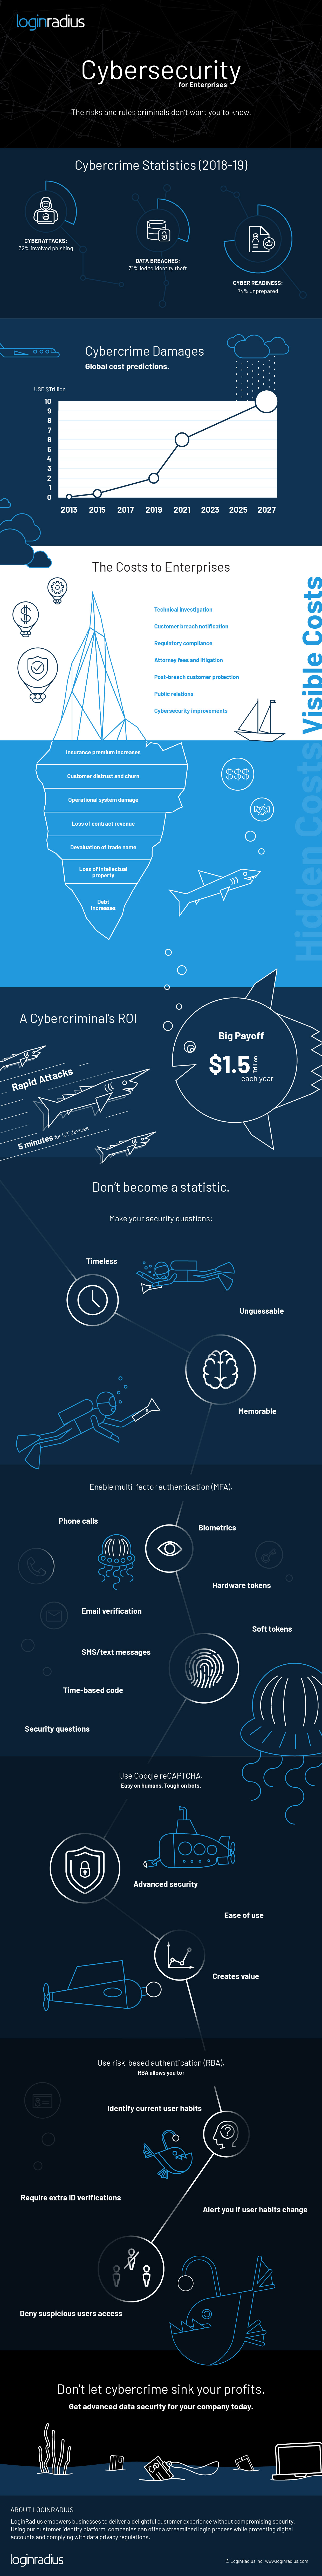 Cybersecurity-Best-Practices-for-Enterprises-infographic